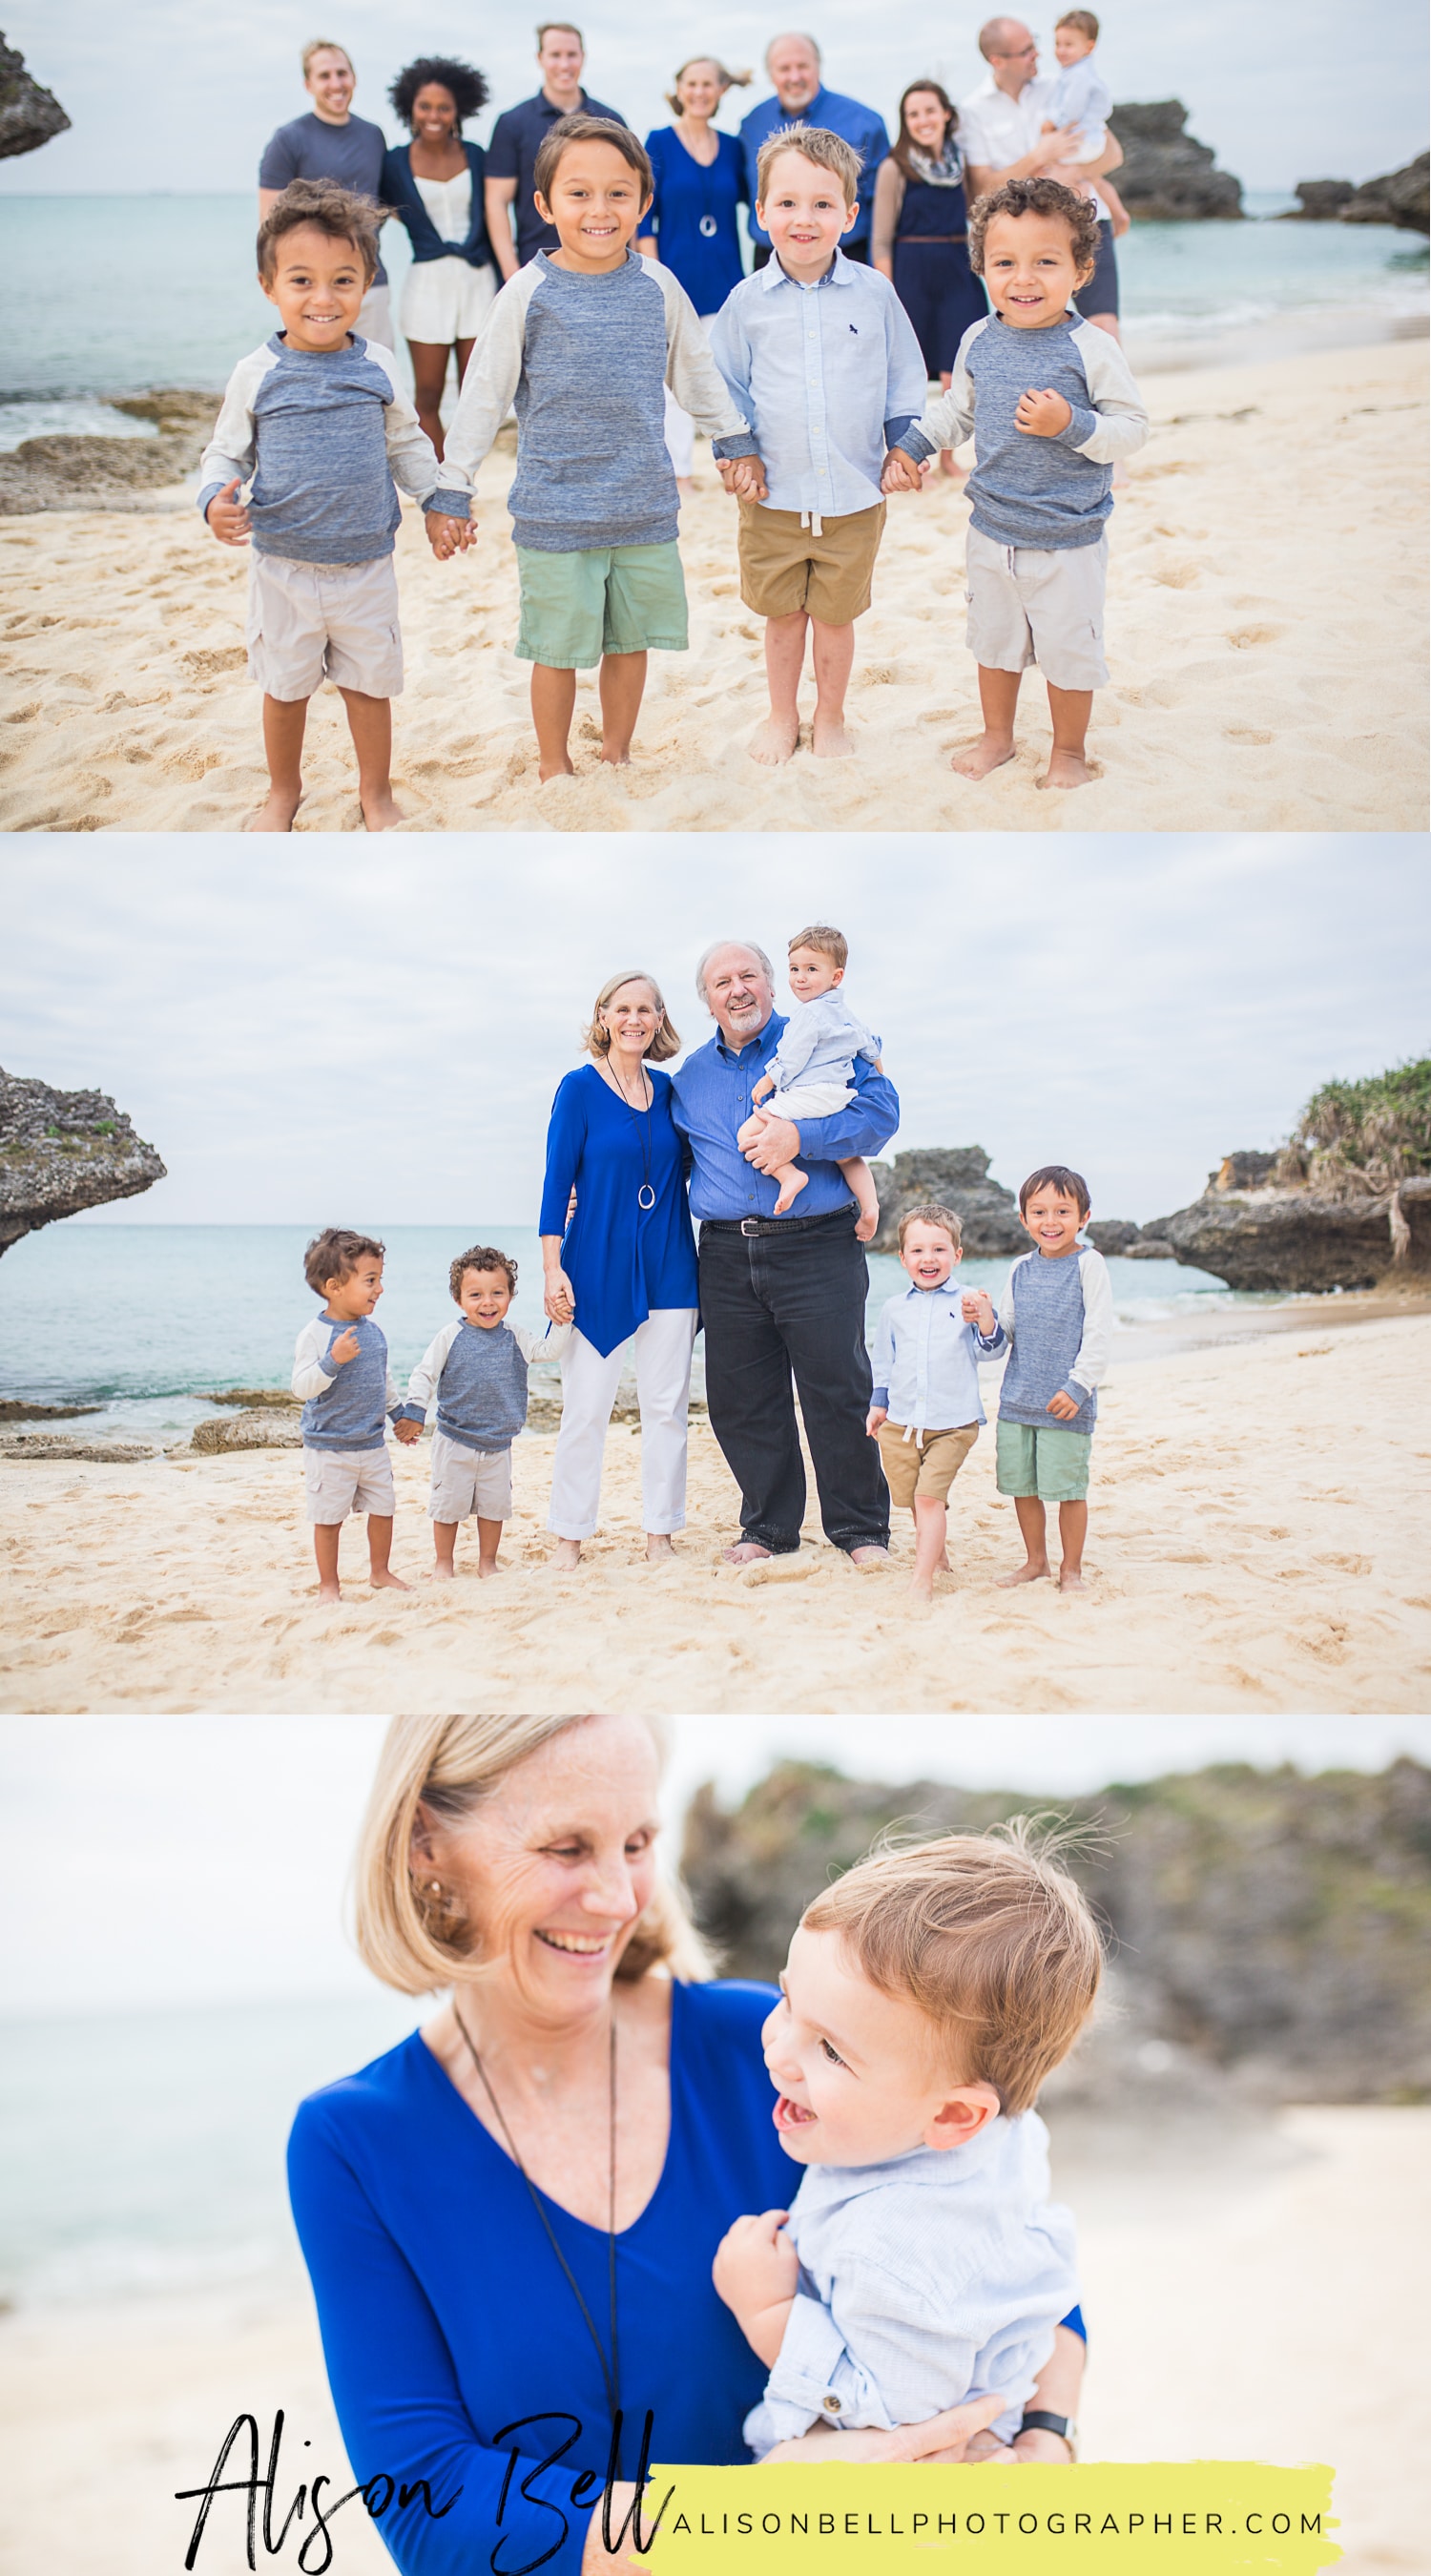 Extended family of 12 on the beach with 5 grandsons in Okinawa Japan by Alison Bell, Photographer